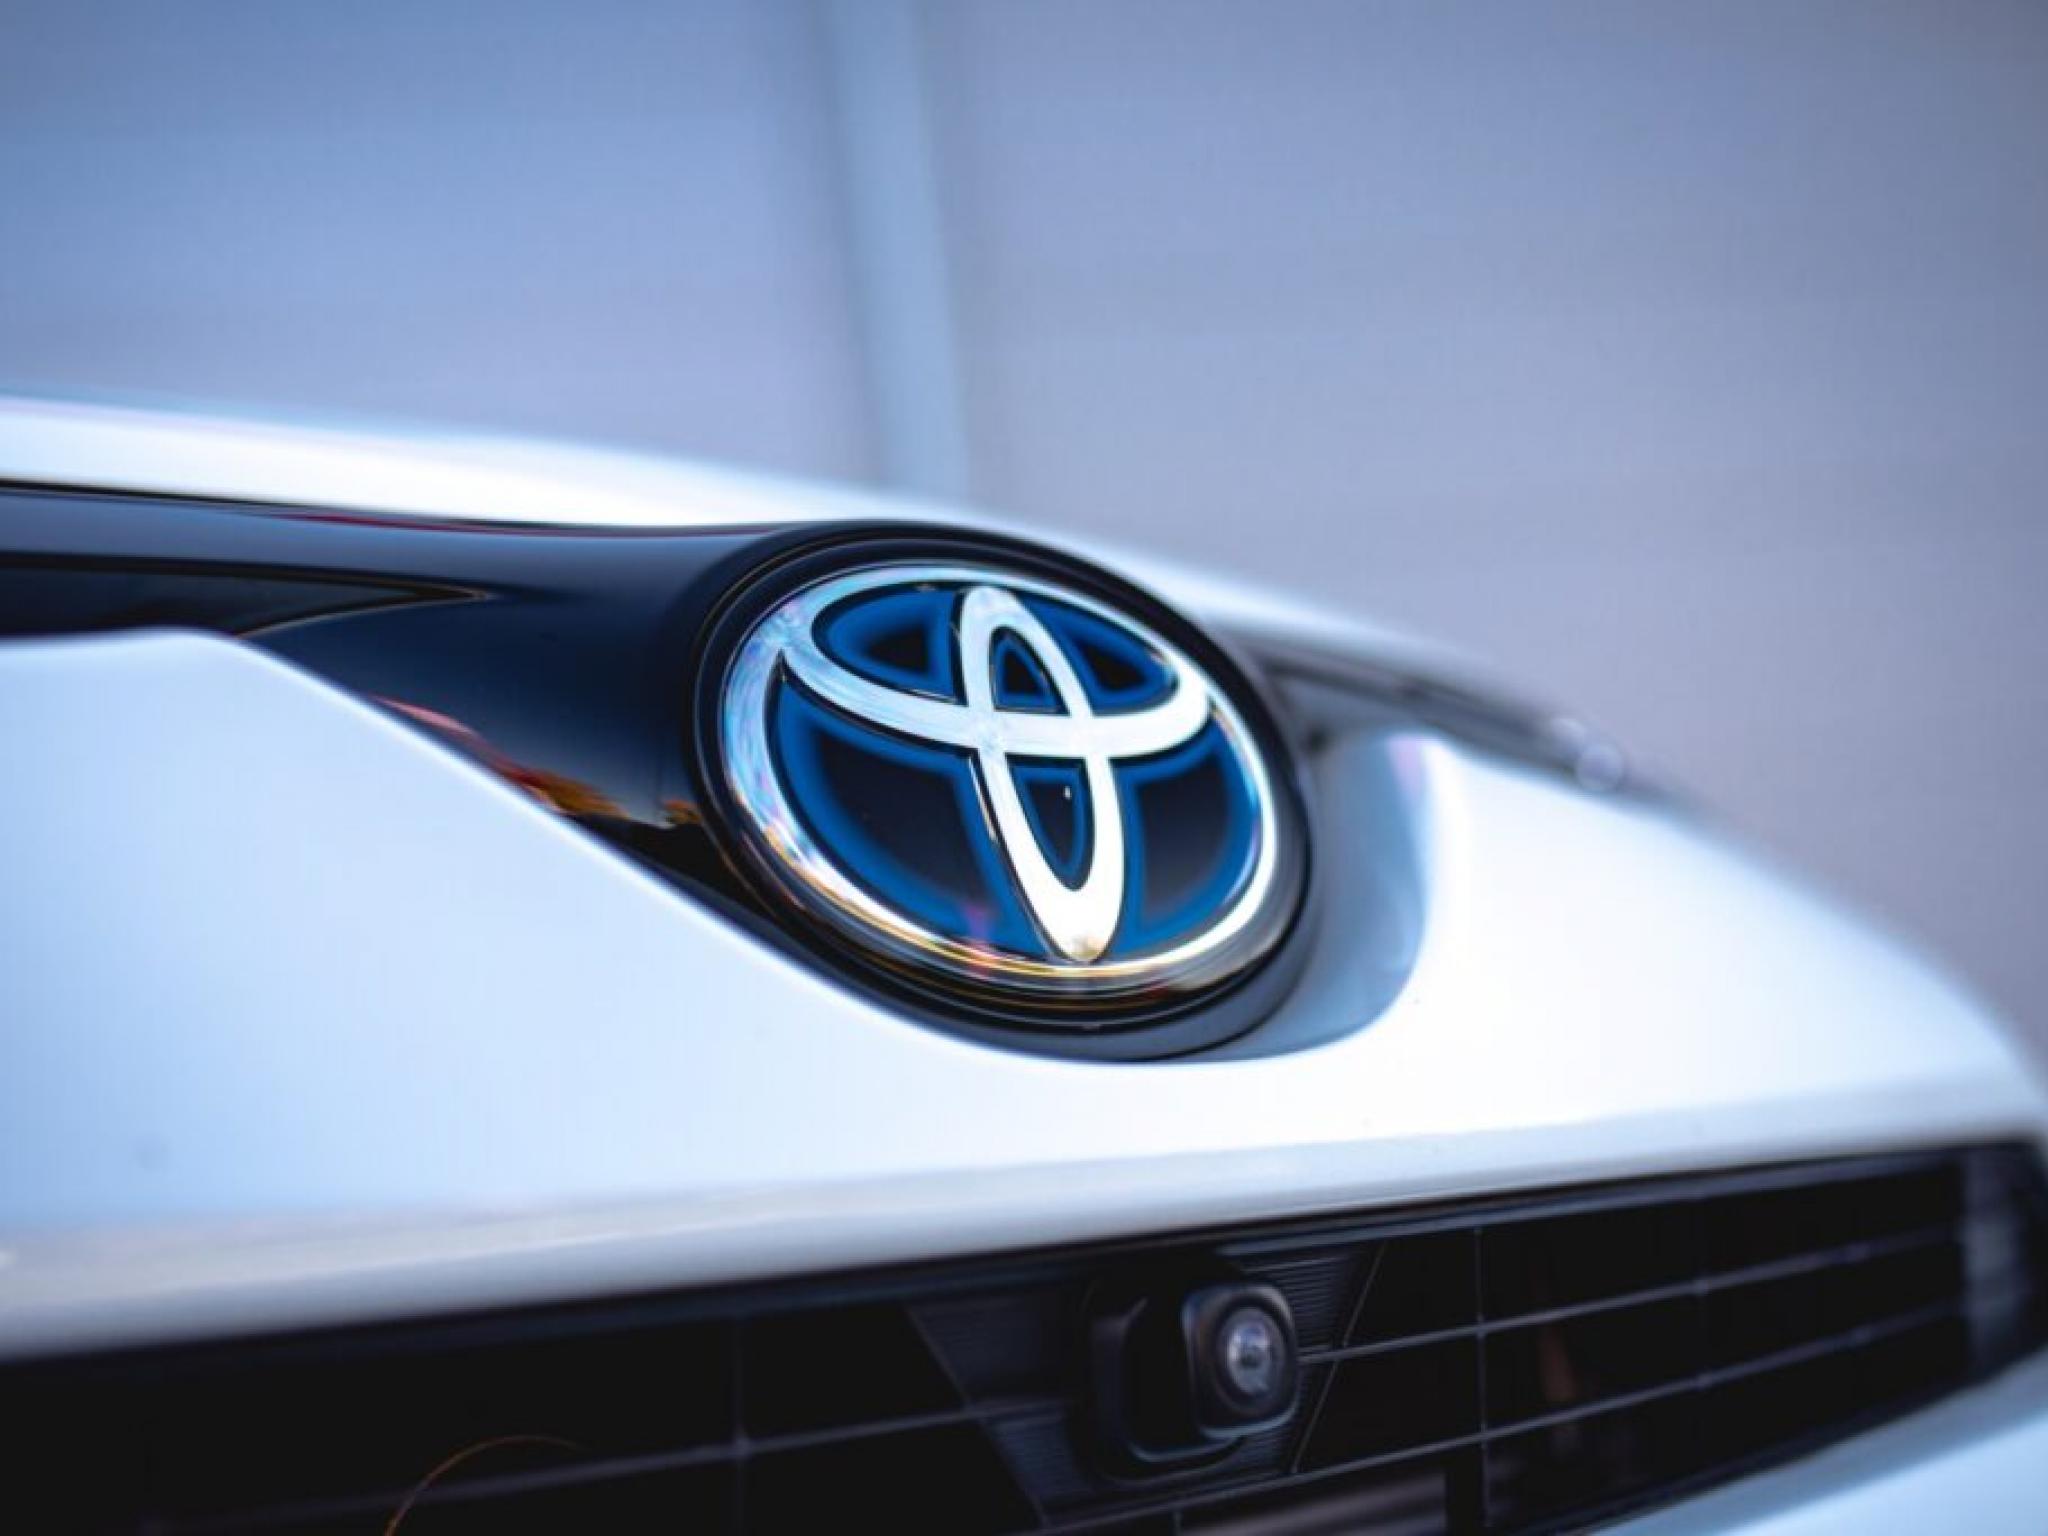  toyotas-certification-crisis-extends-beyond-japan-could-impact-eu-operations 